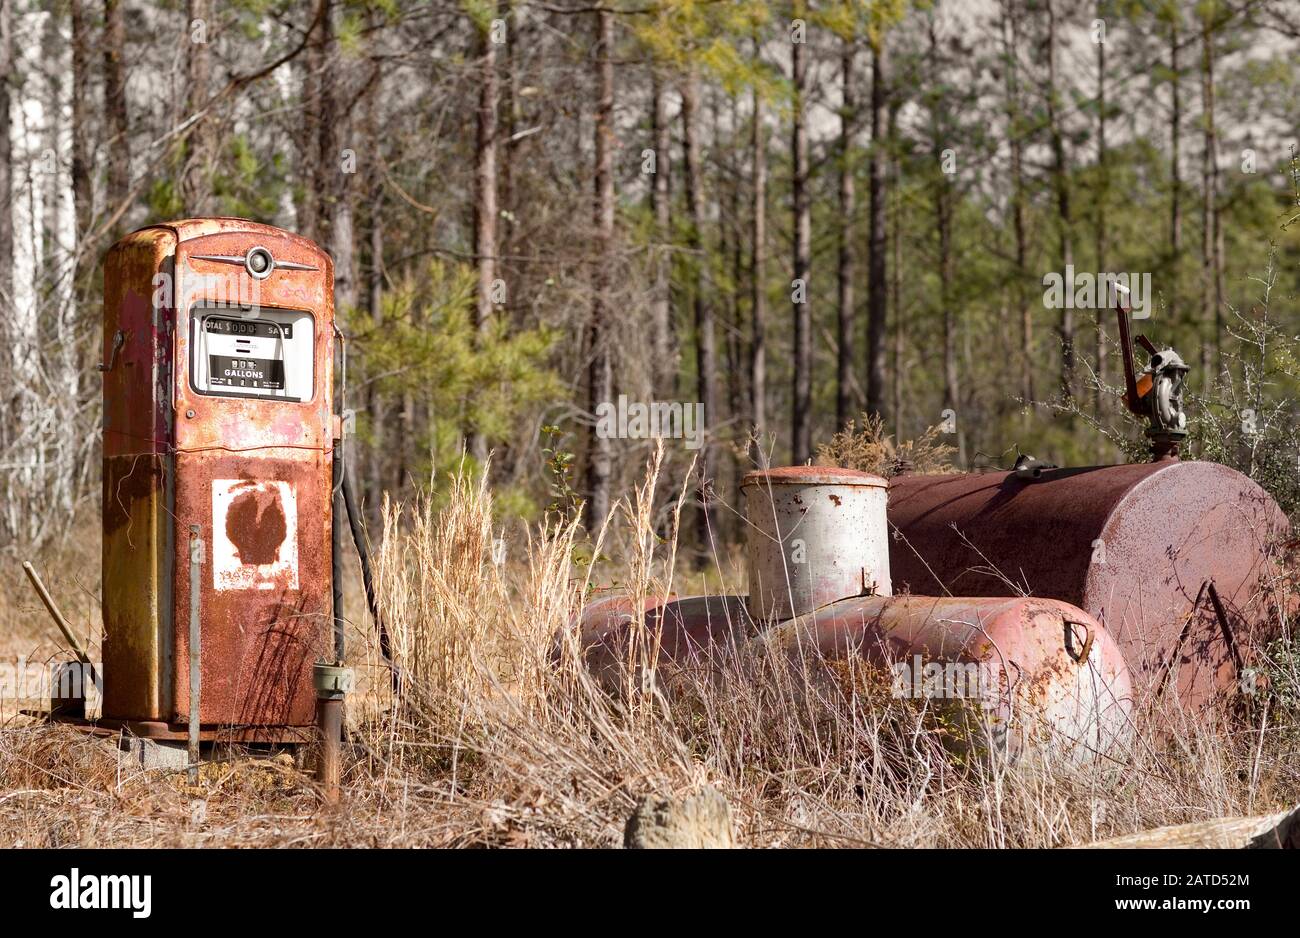 An old Shell Oil Company gasoline fuel pump next to a propane, and a diesel fuel tank, in an overgrown lot where a filling station used to be. Stock Photo